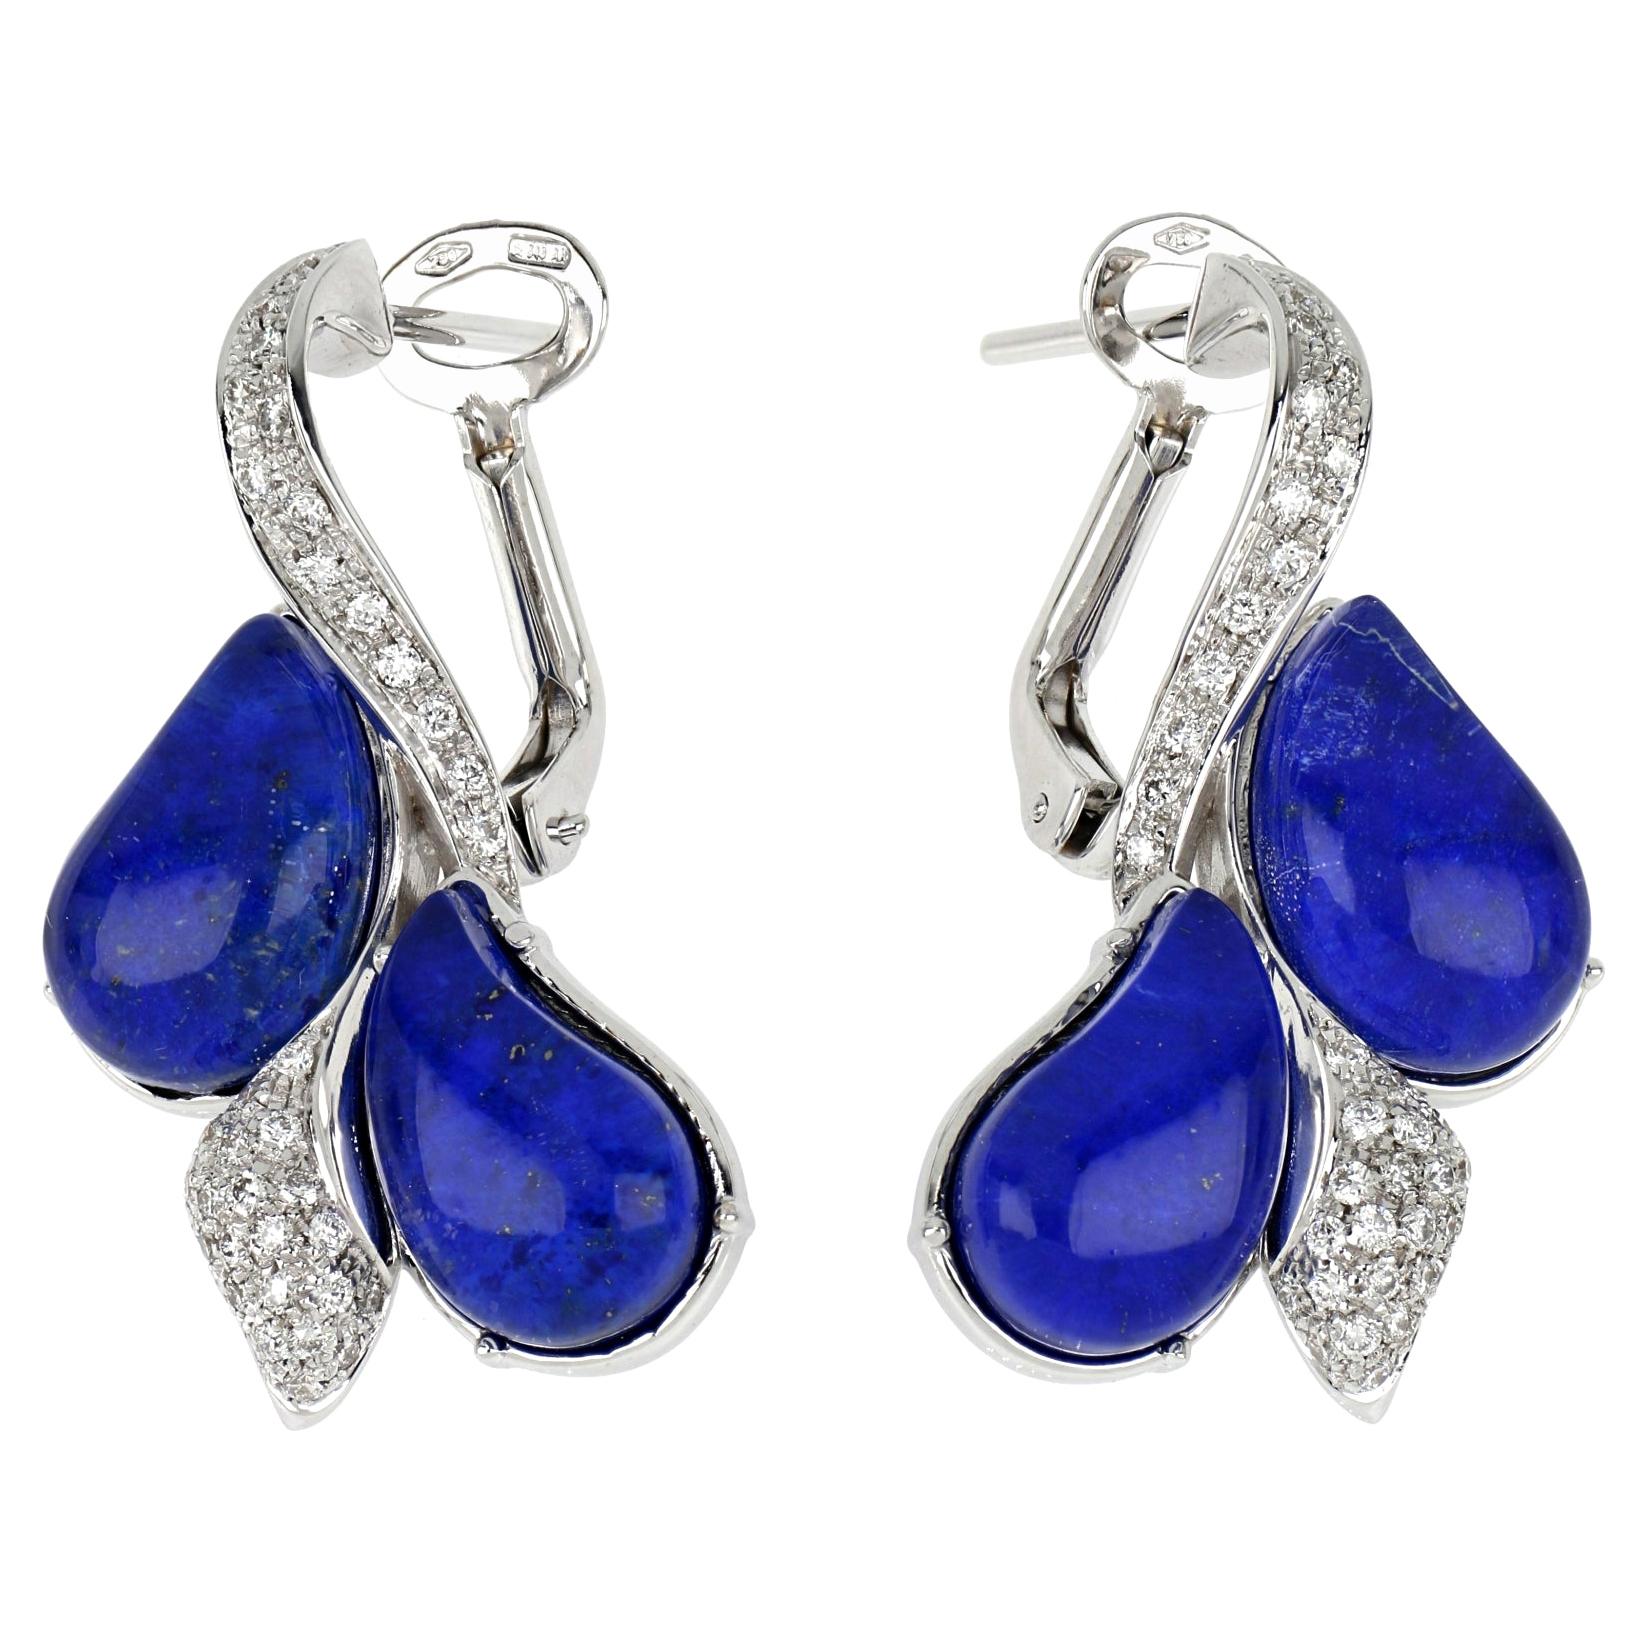 18kt White Gold Les Fleurs Earrings with Lapis Lazuli and Diamonds